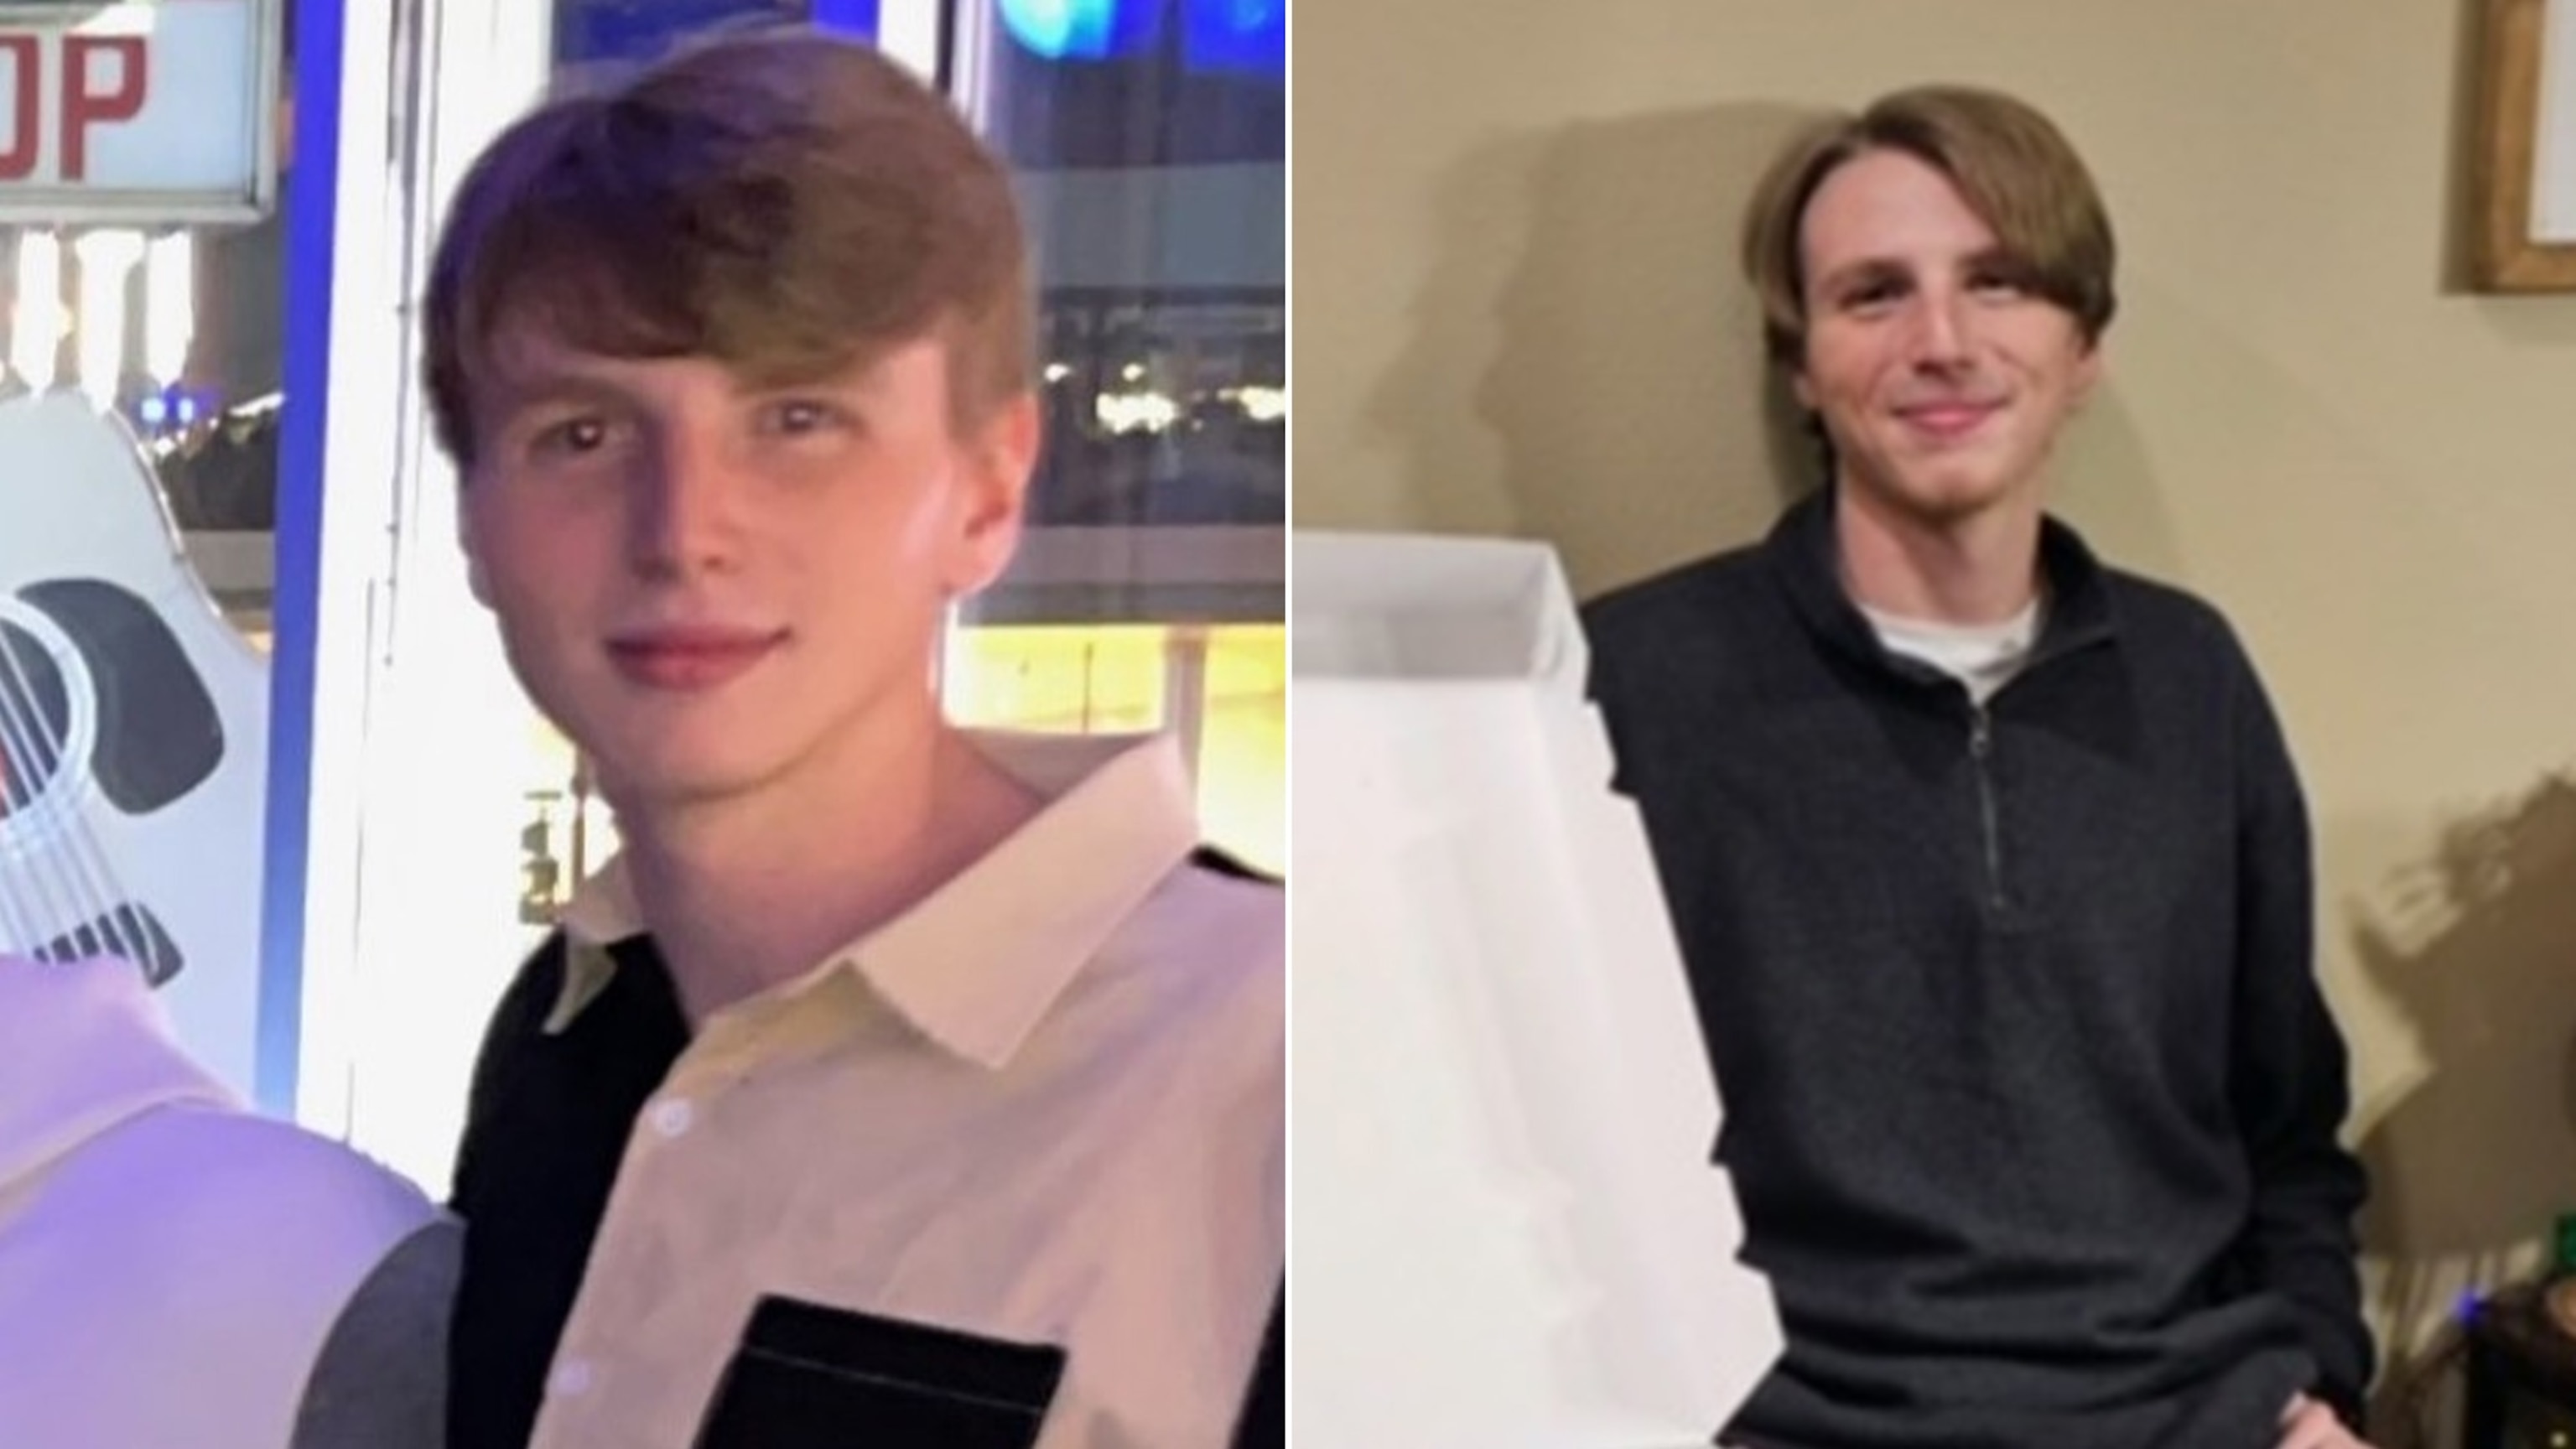 PHOTO: In two undated photos provided by the Metro Nashville Police Department, Riley Strain, 22, is shown.